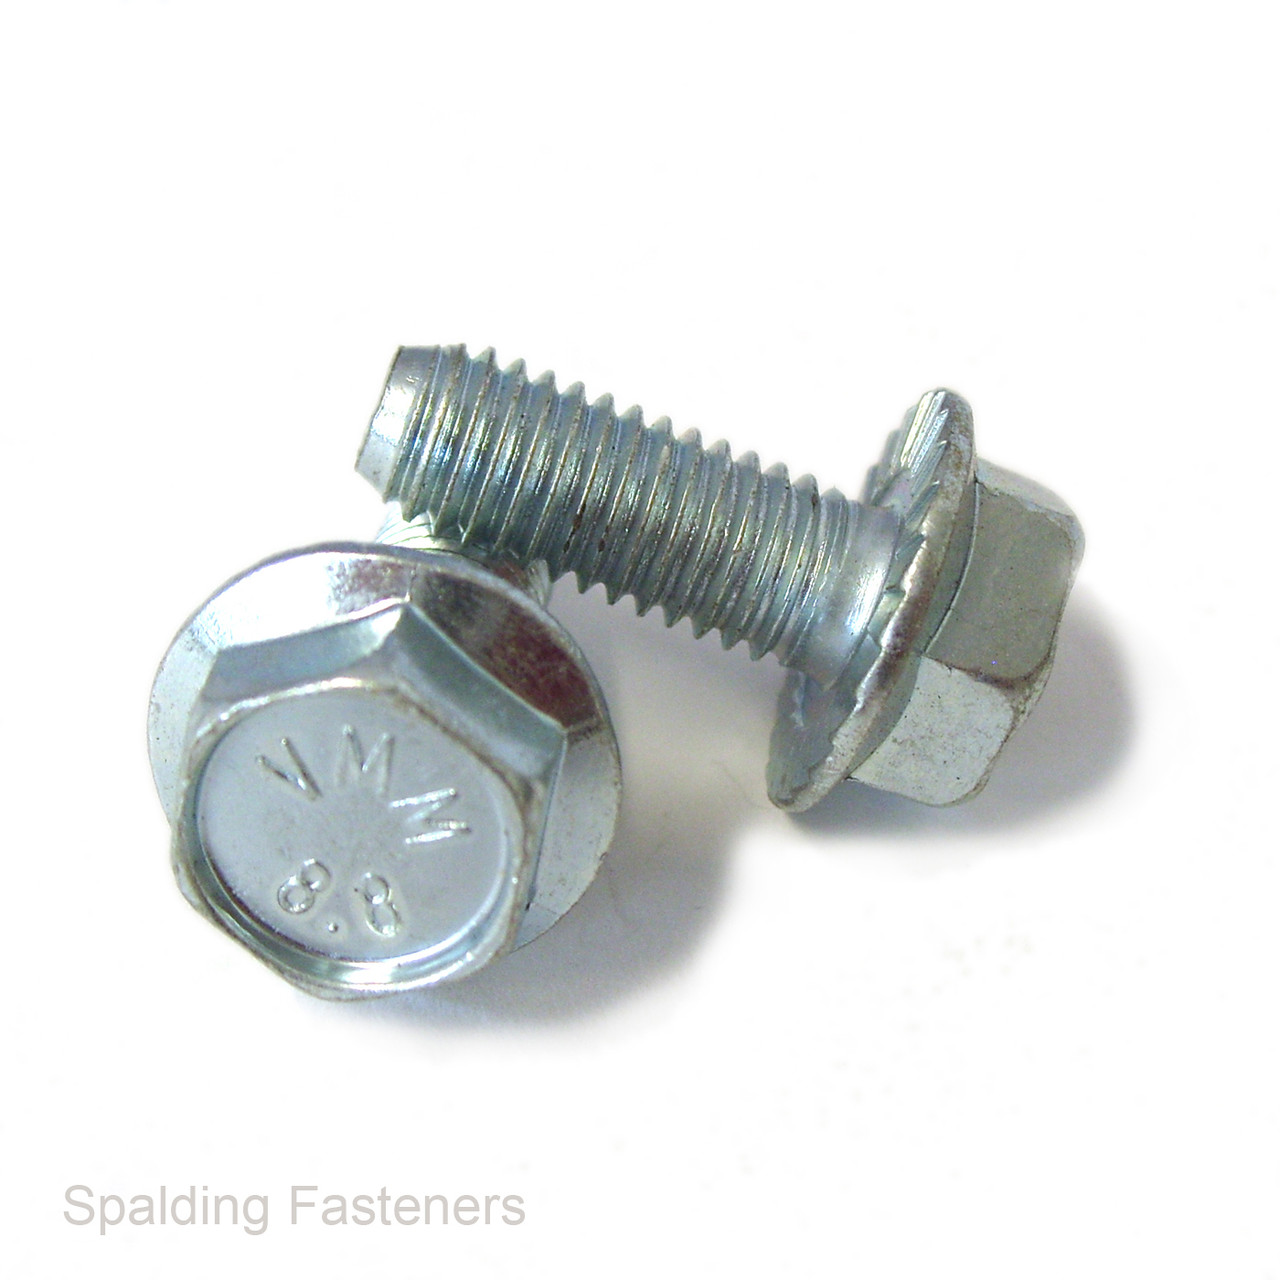 UNC HIGH TENSILE SERRATED FLANGE BOLTS FULL THREAD 1/4" 5/16" 3/8"  Spalding Fasteners